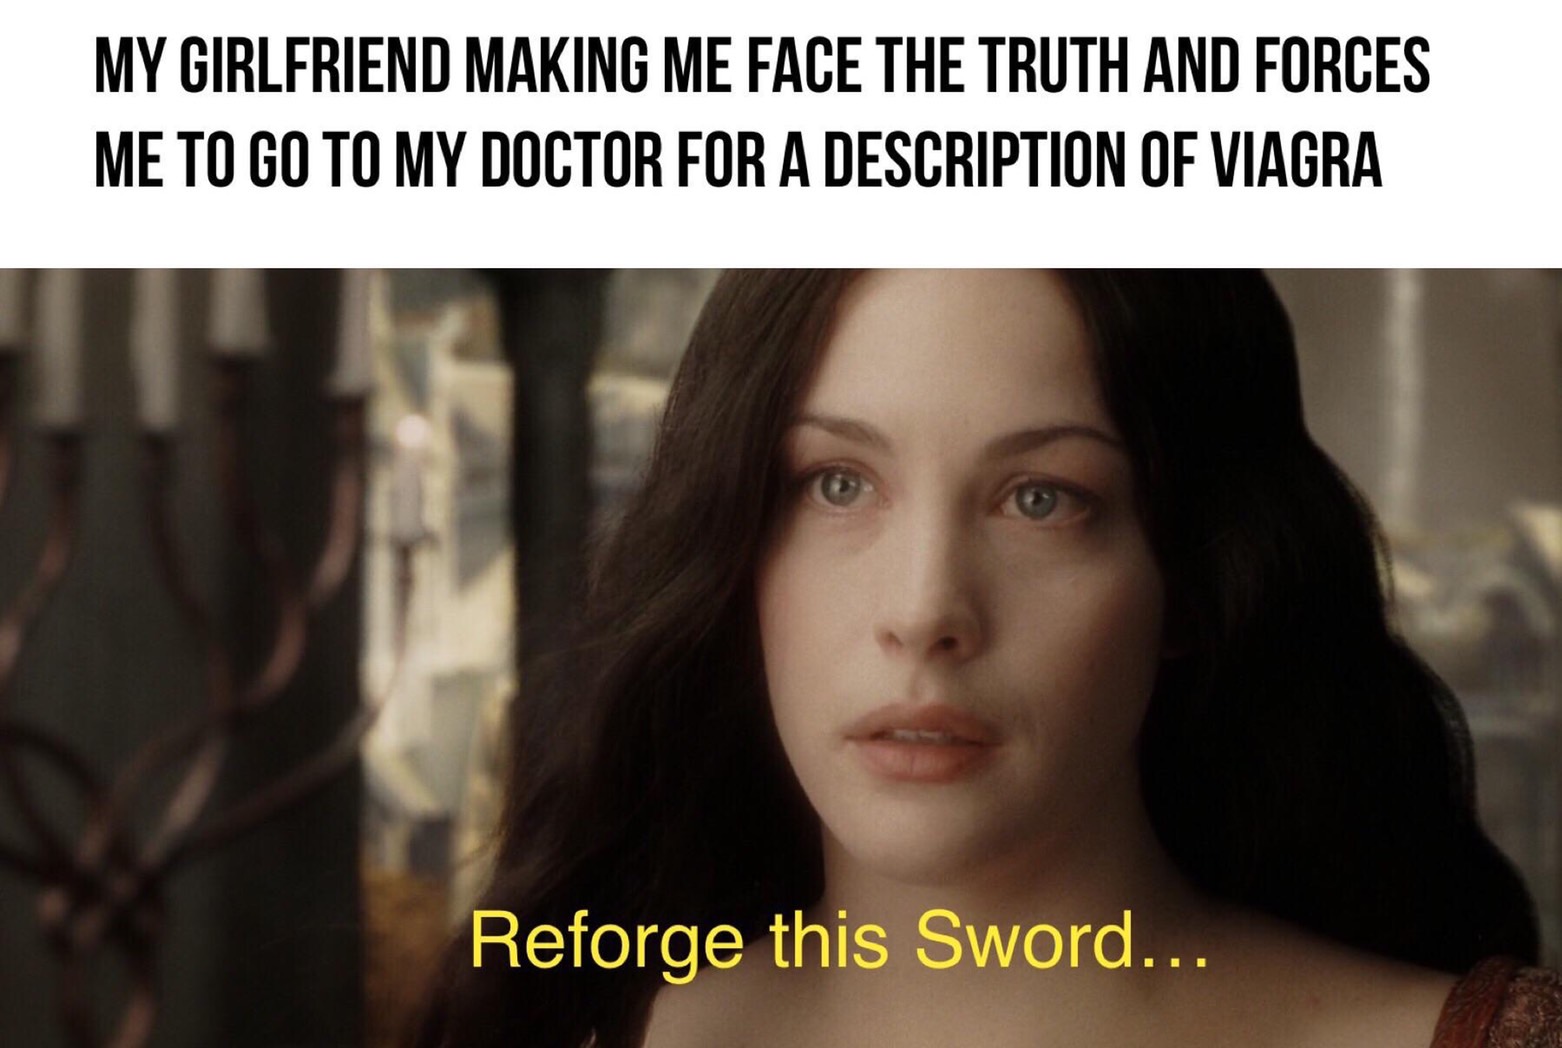 My Girlfriend Making Me Face The Truth And Forces Me To Go To My Doctor For A Description Of Viagra Reforge this Sword...